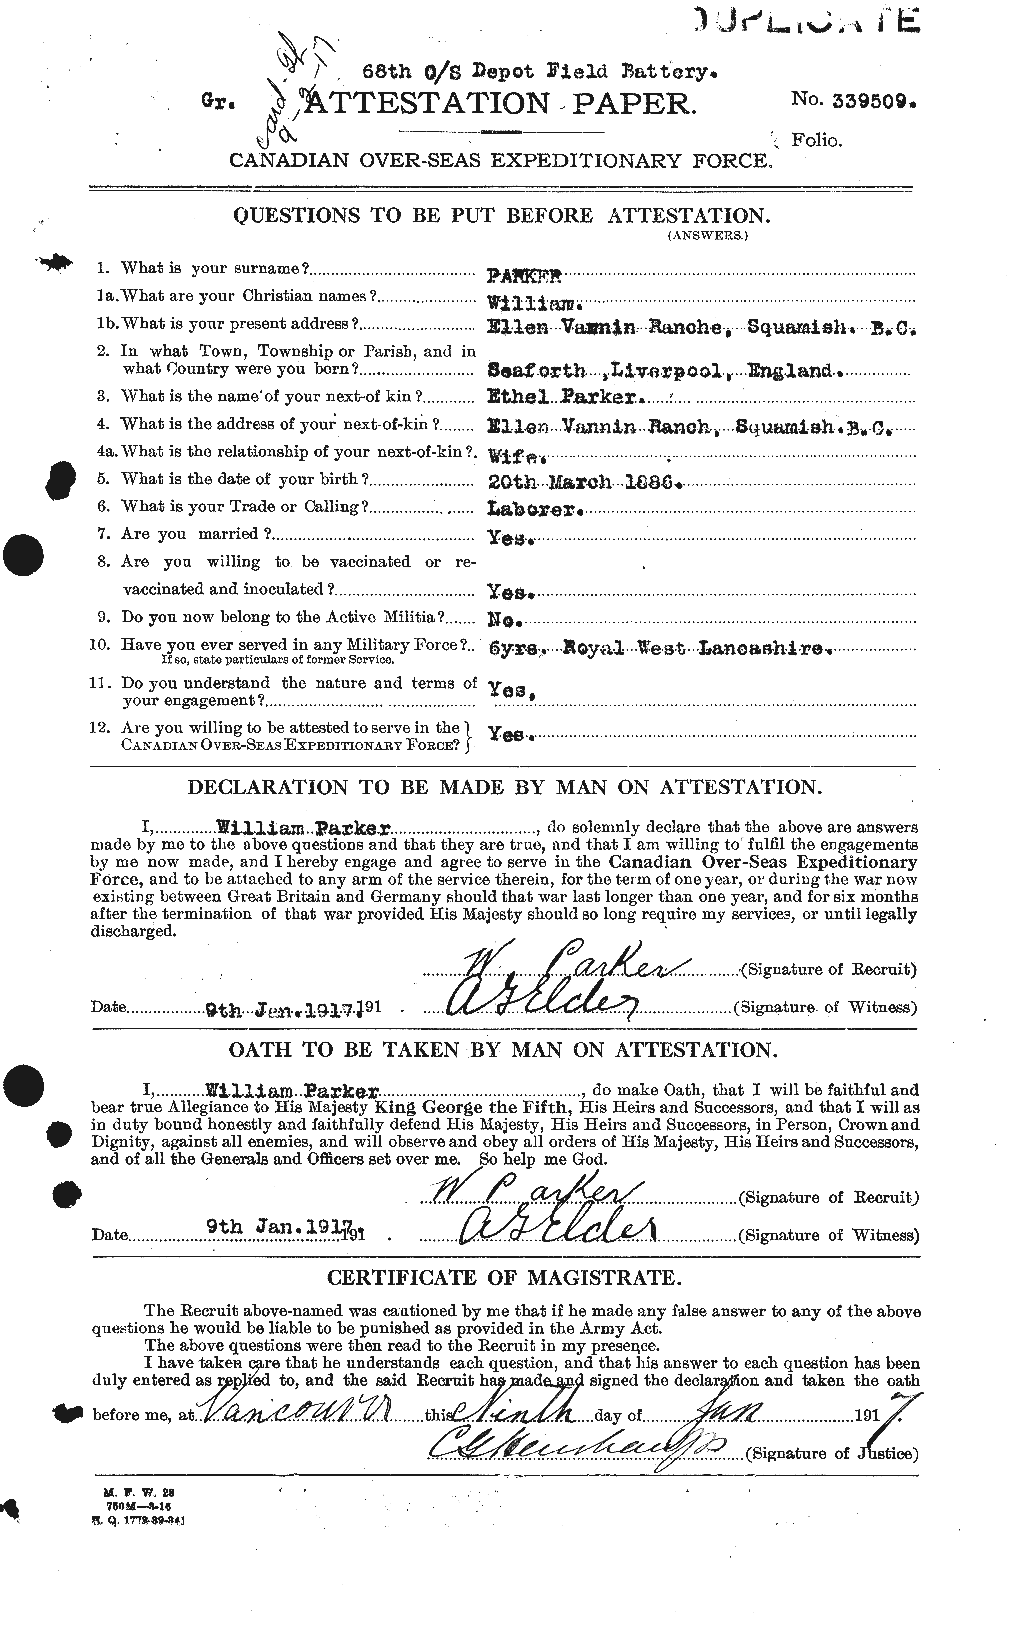 Personnel Records of the First World War - CEF 565722a